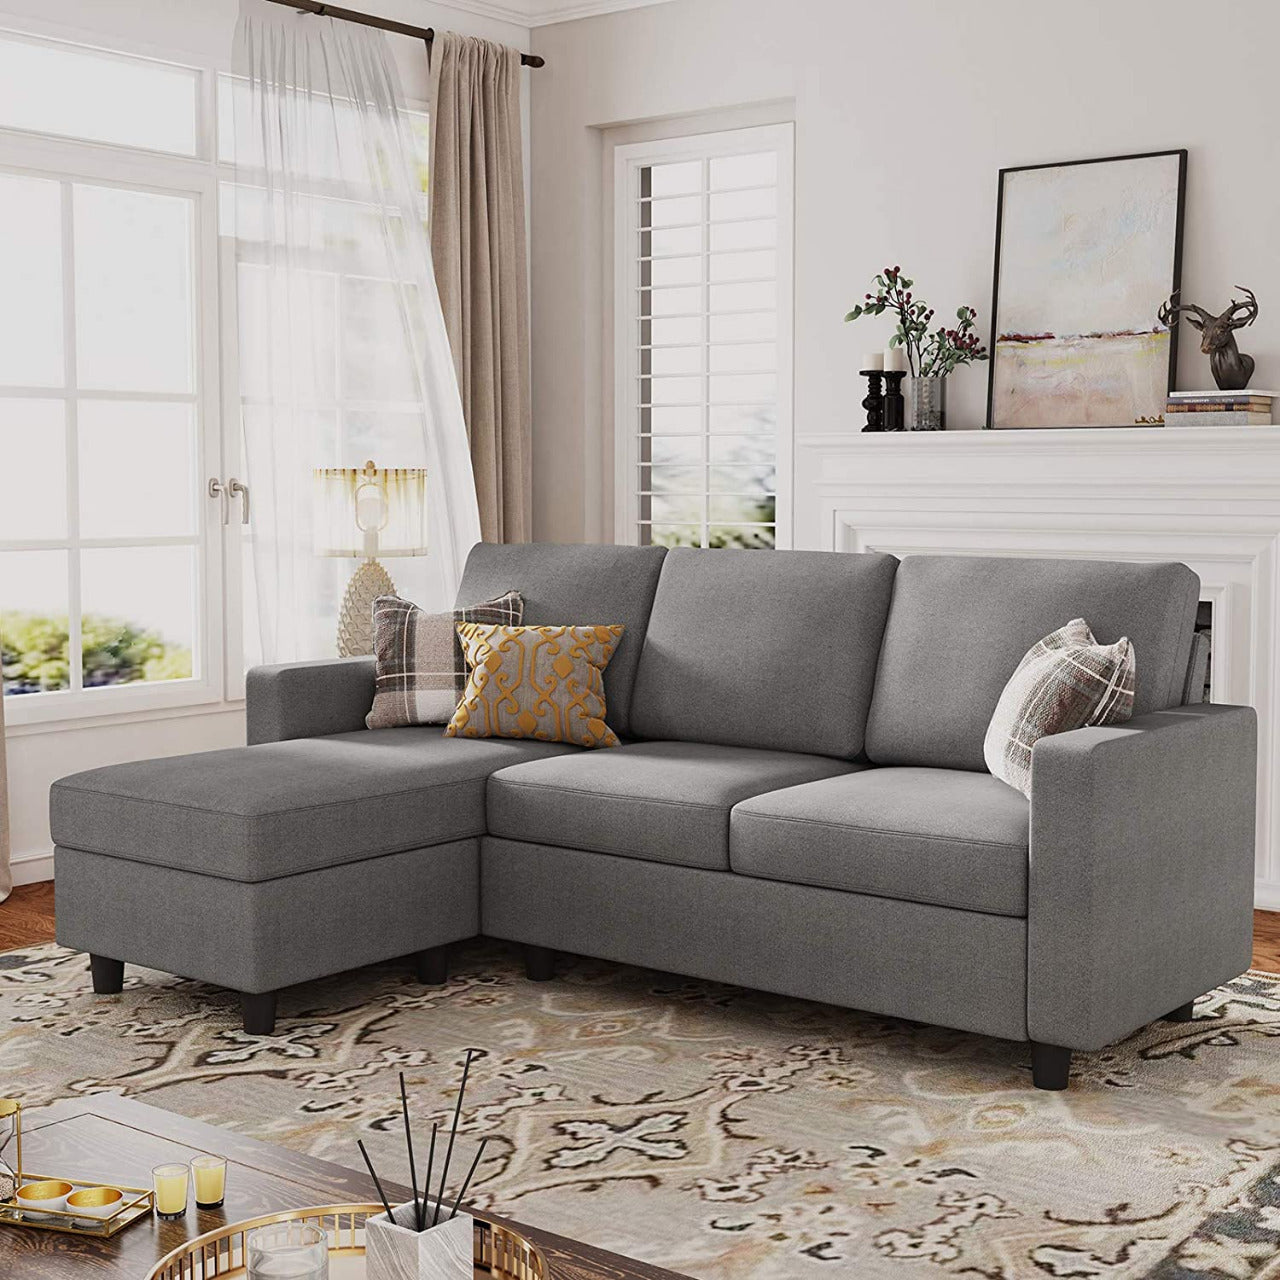 L Shape Sofa Set Couch For